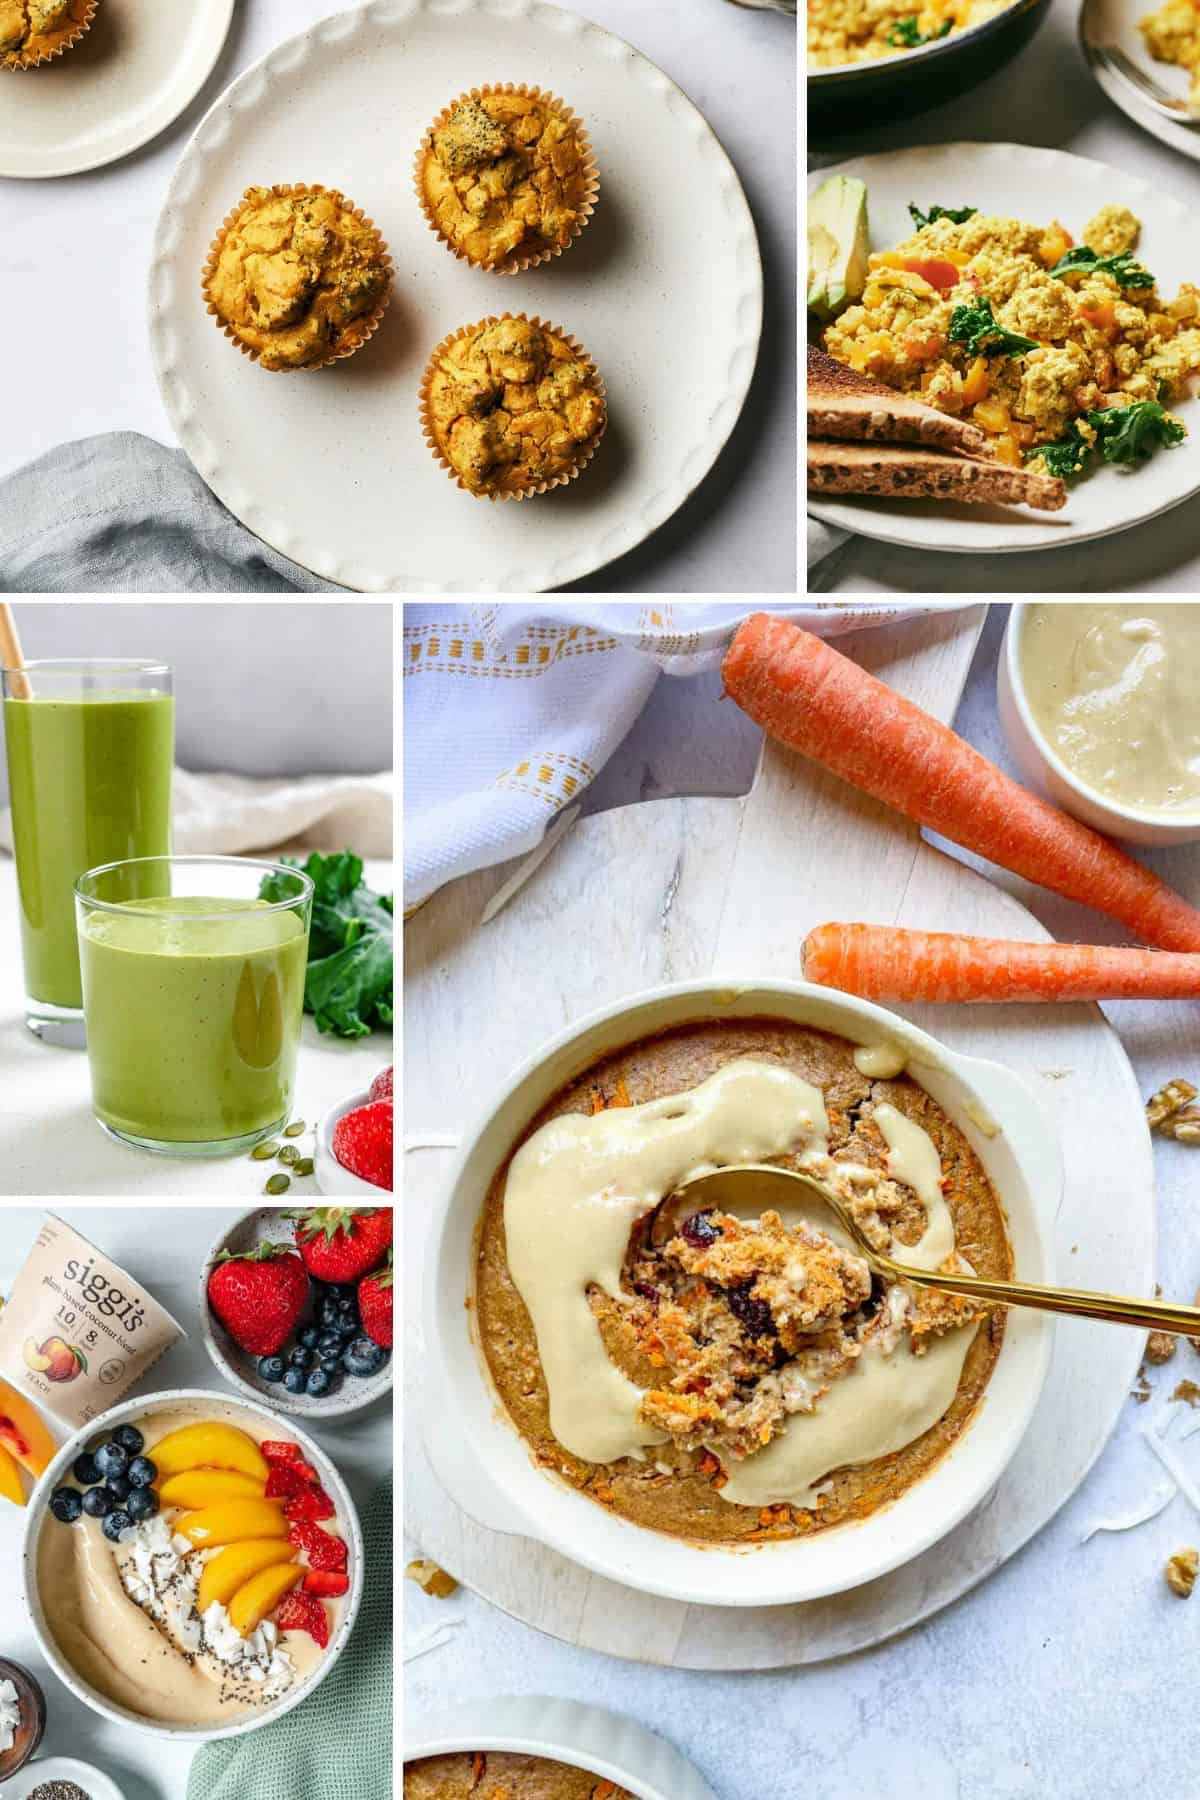 Image collage showing high protein vegan breakfasts with no eggs or dairy.